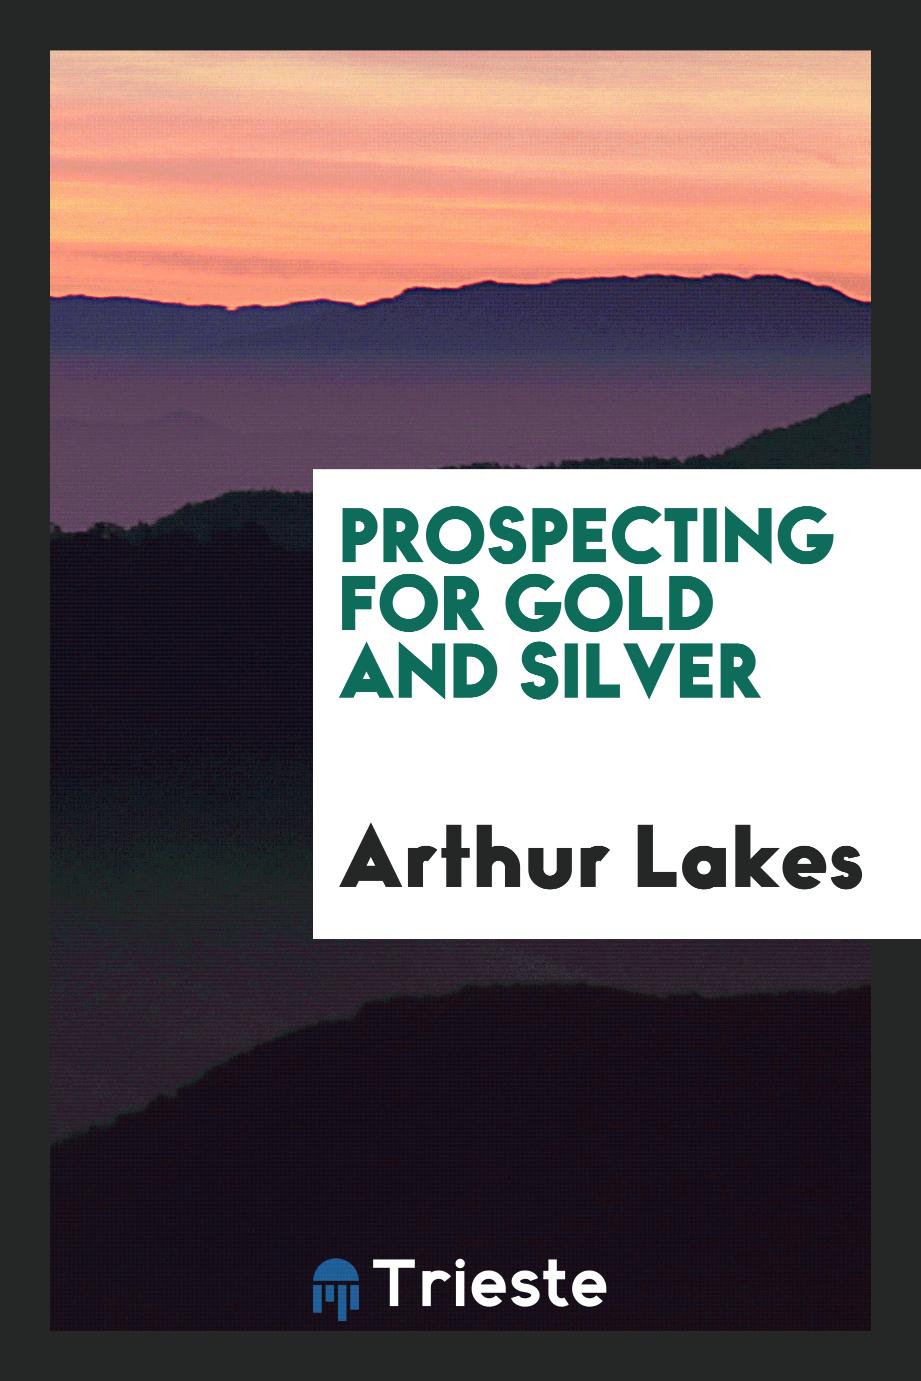 Prospecting for gold and silver